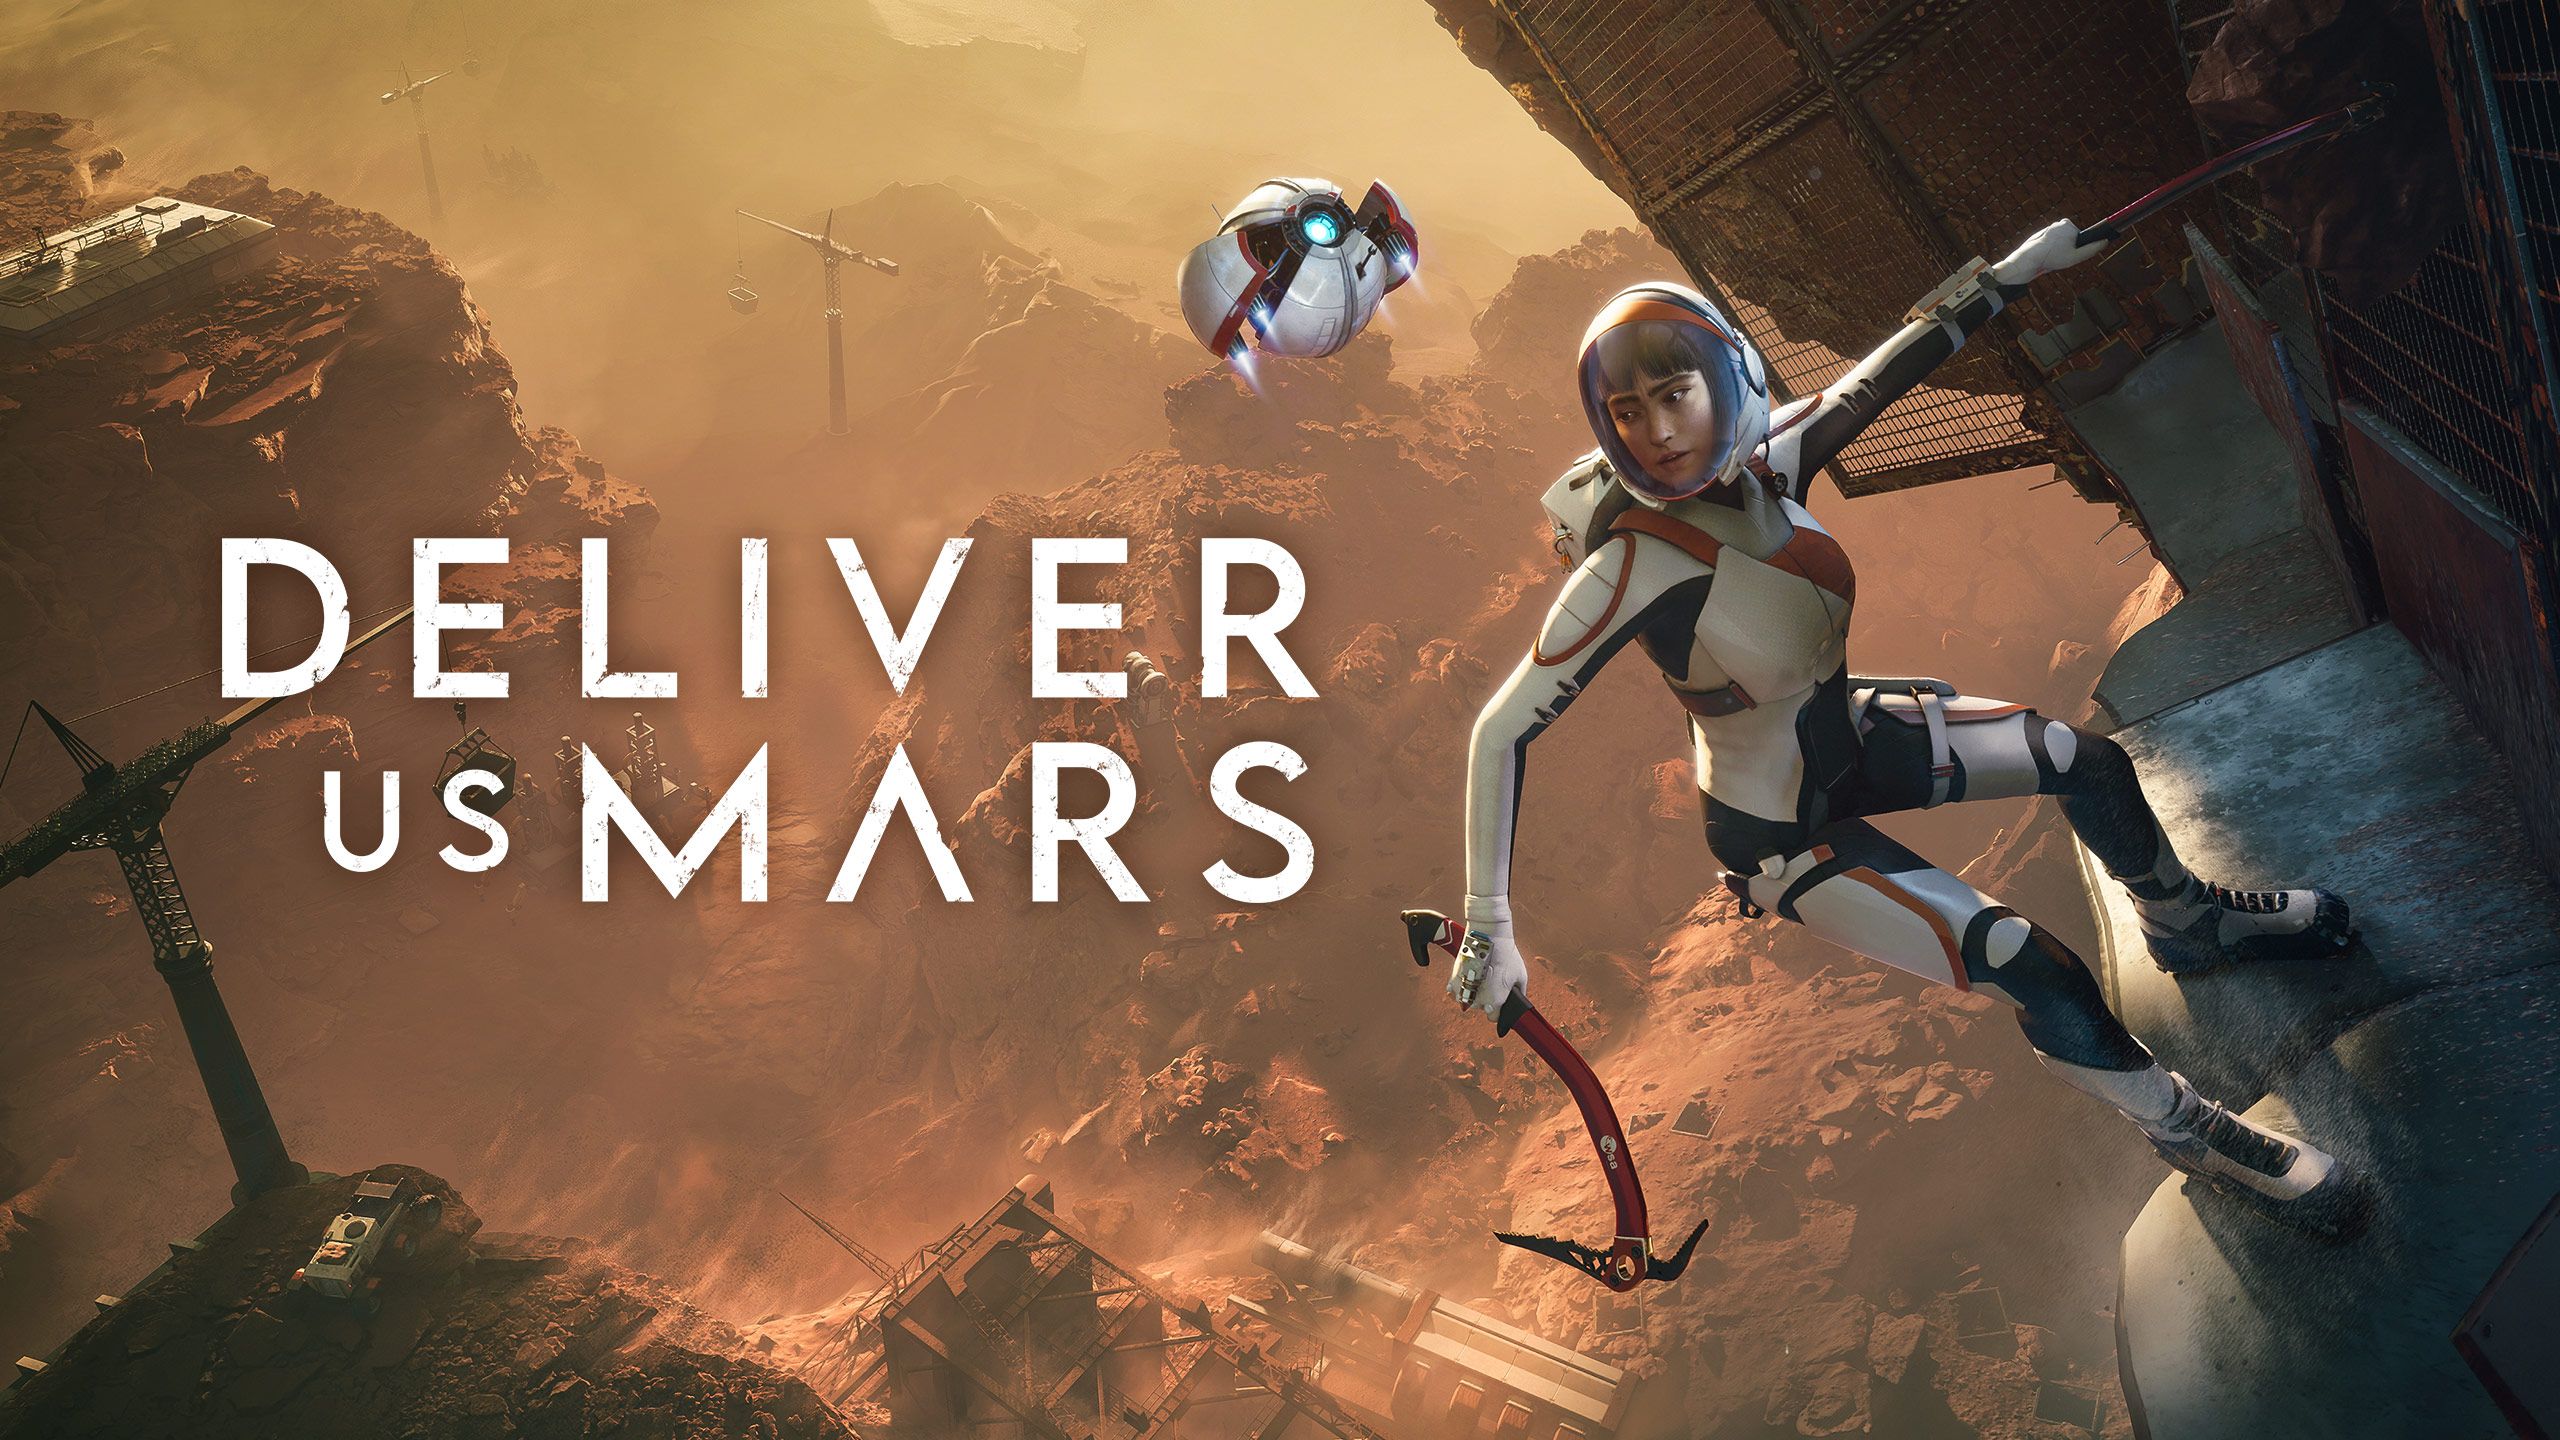 FREE GAME: Deliver Us Mars is Free at Epic Games